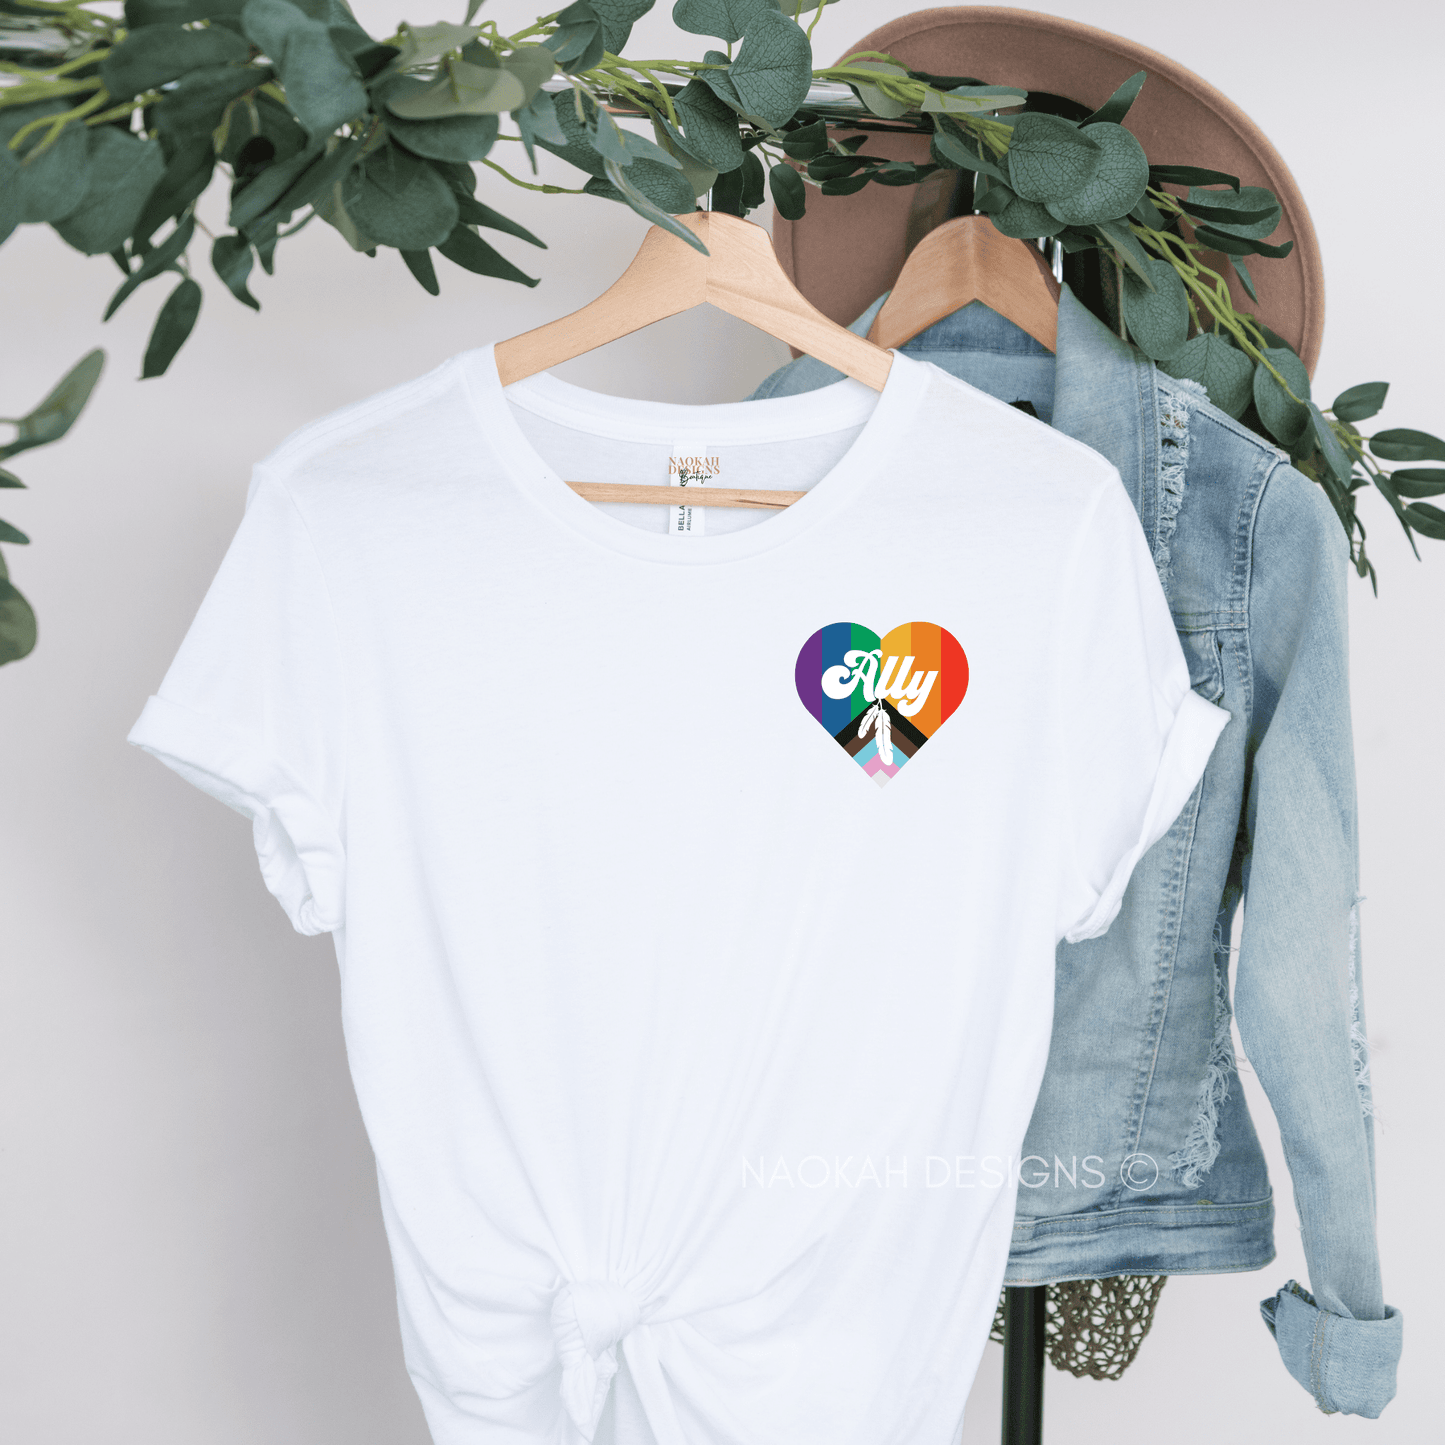 pride ally shirt, two-spirit ally shirt, indigenous owned shop, love is love, equality shirt, rainbow, you are safe with me, lgbtq2s+ ally